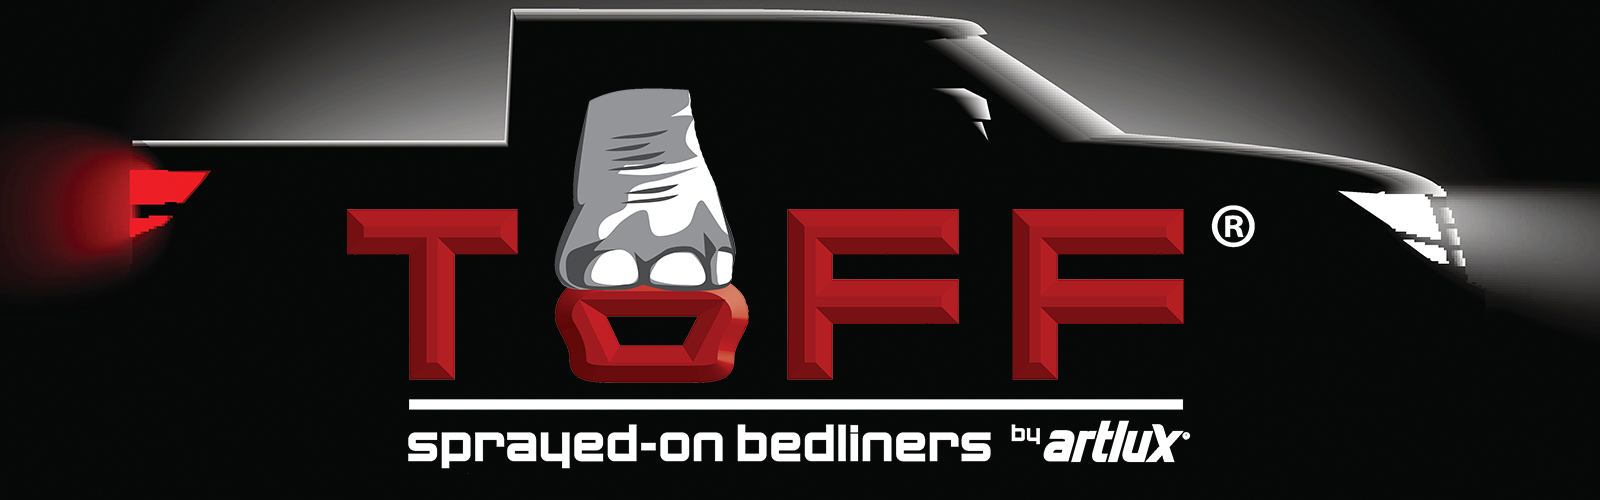 PROTECT YOUR TRUCK WITH TOFF SPRAYED-ON BEDLINERS FROM HEALEY BROTHERS